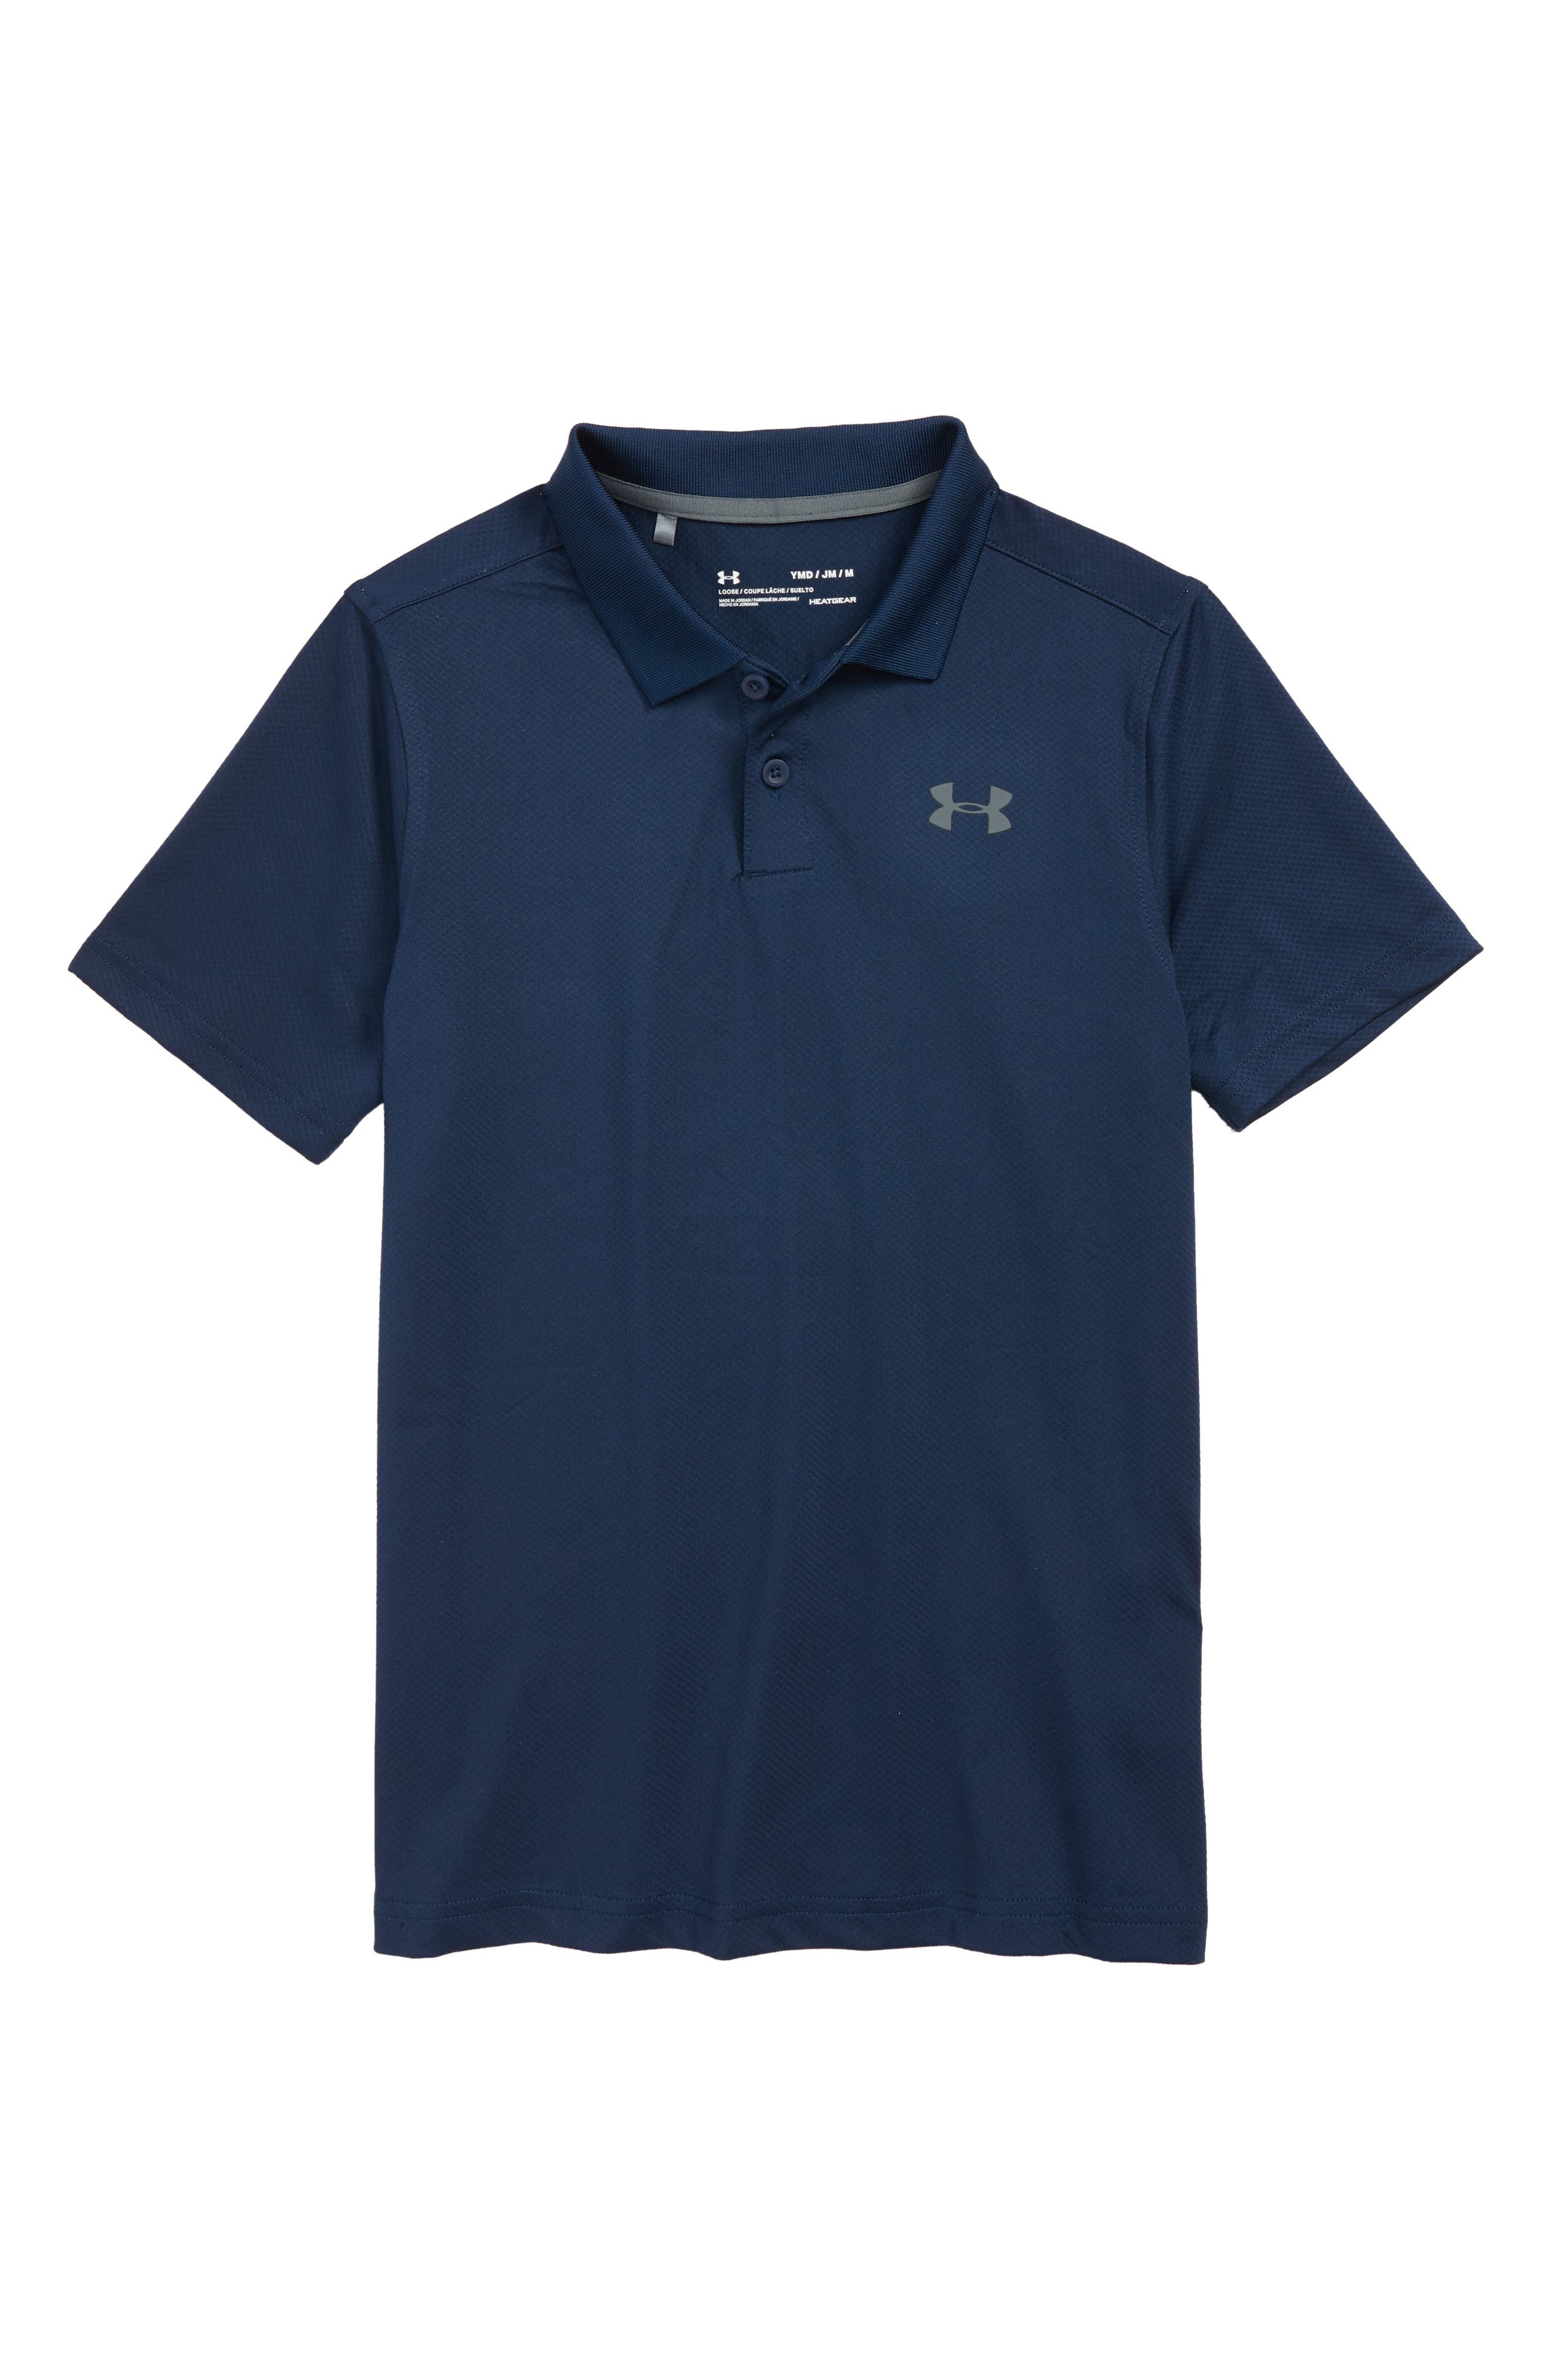 under armour clothes for kids